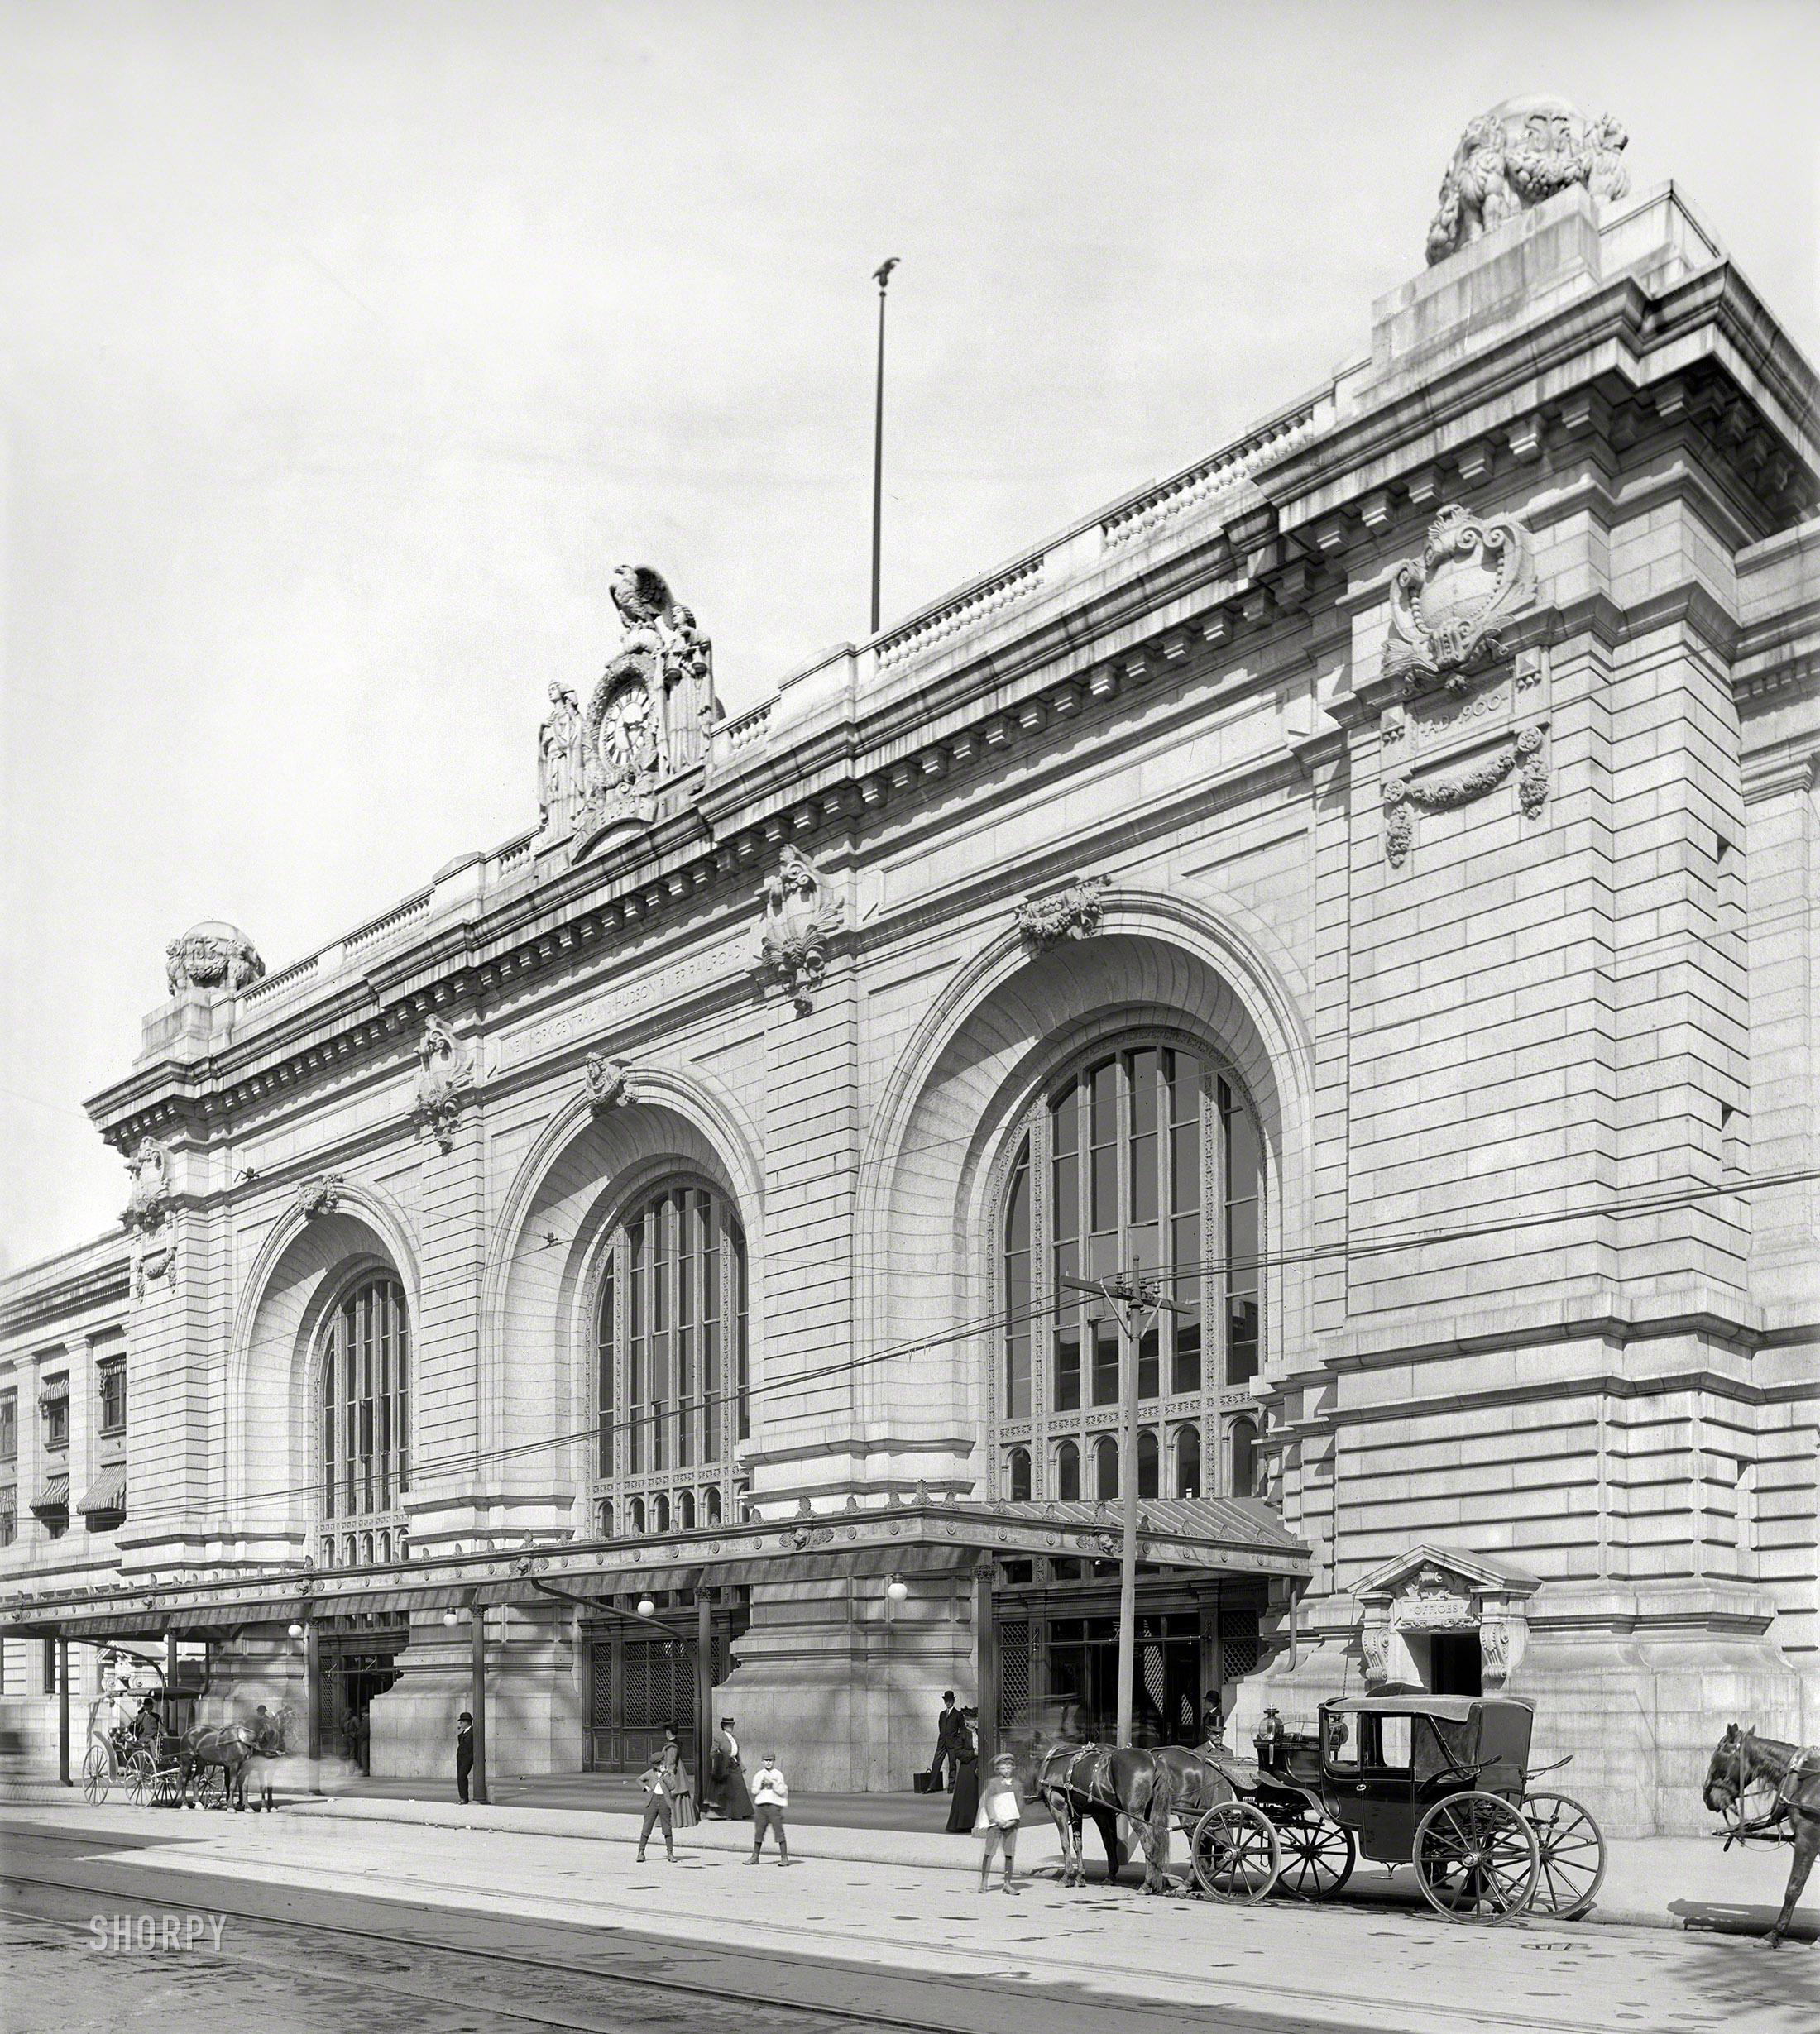 Circa 1906. "Entrance, N.Y.C. & H.R. R.R. station, Albany, New York." The Beaux-Arts depot of the New York Central & Hudson River Railroad, also known as Albany Union Station. 8x10 inch dry plate glass negative. View full size.